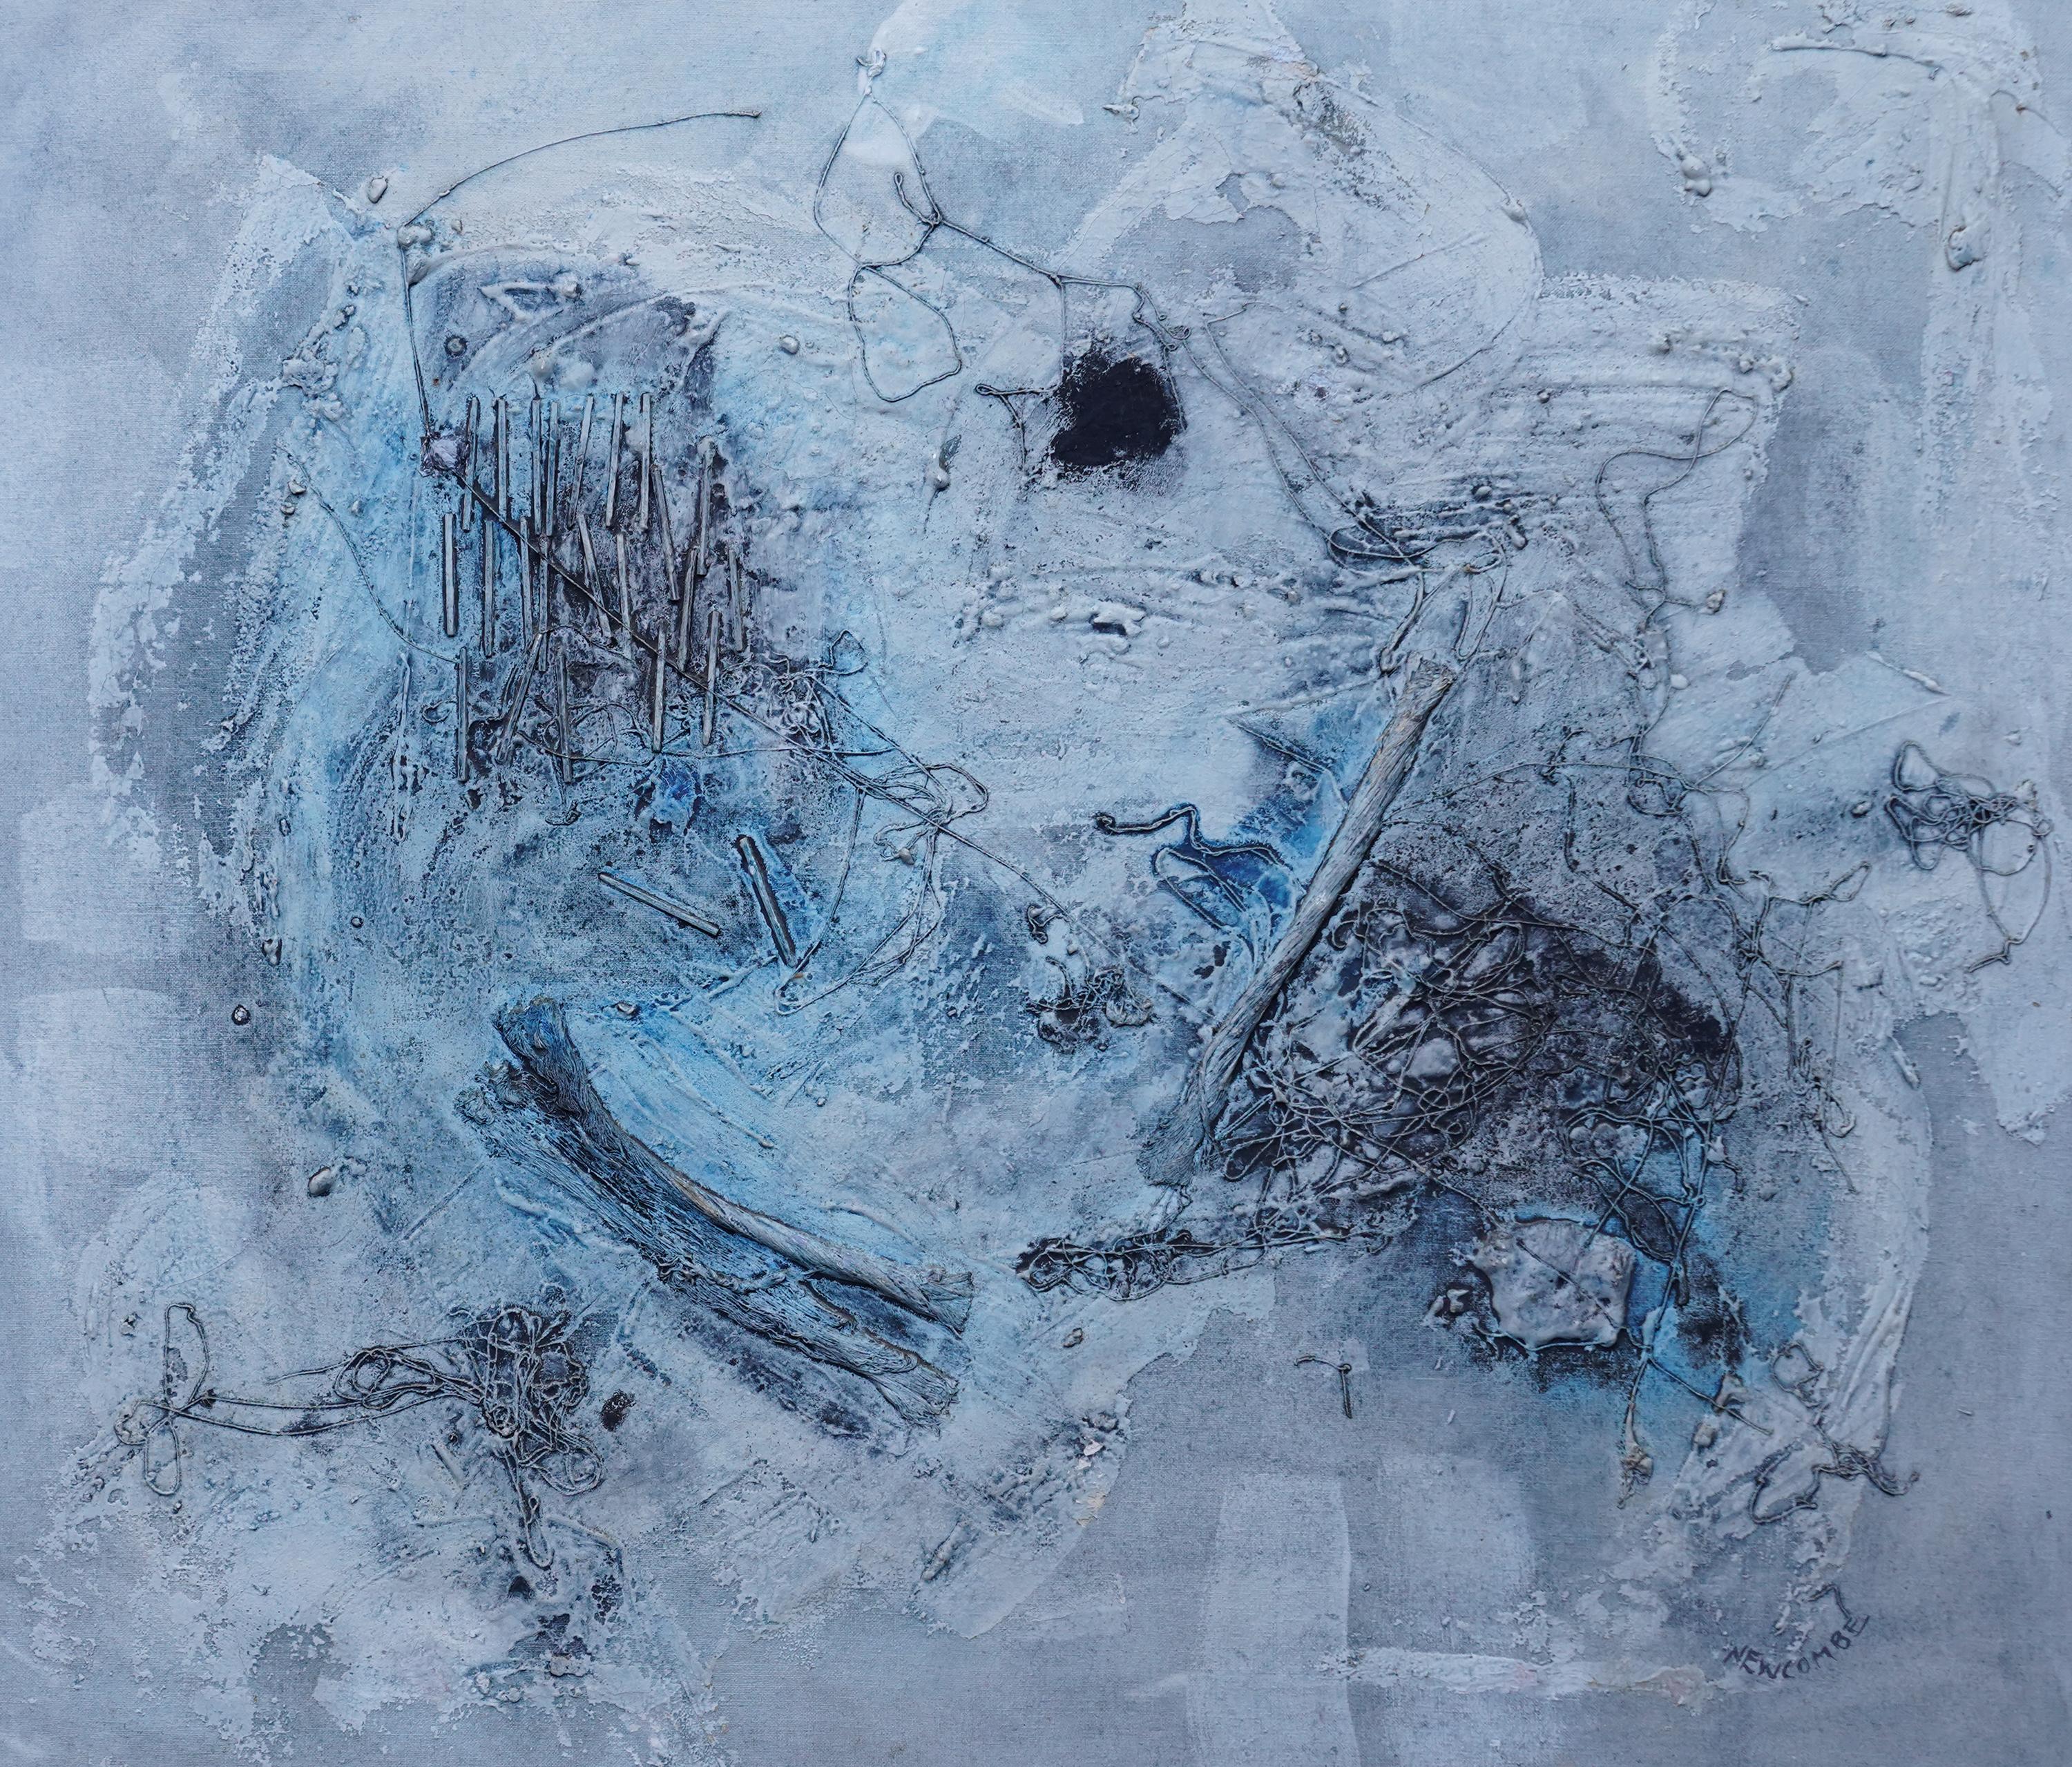 An original large abstract oil on canvas by British Canadian artist William John Bertram Newcombe. This stunning abstract expressionist oil in blues and greys is a bold, adventurous and confident abstract expressionist Canadian work and dates to